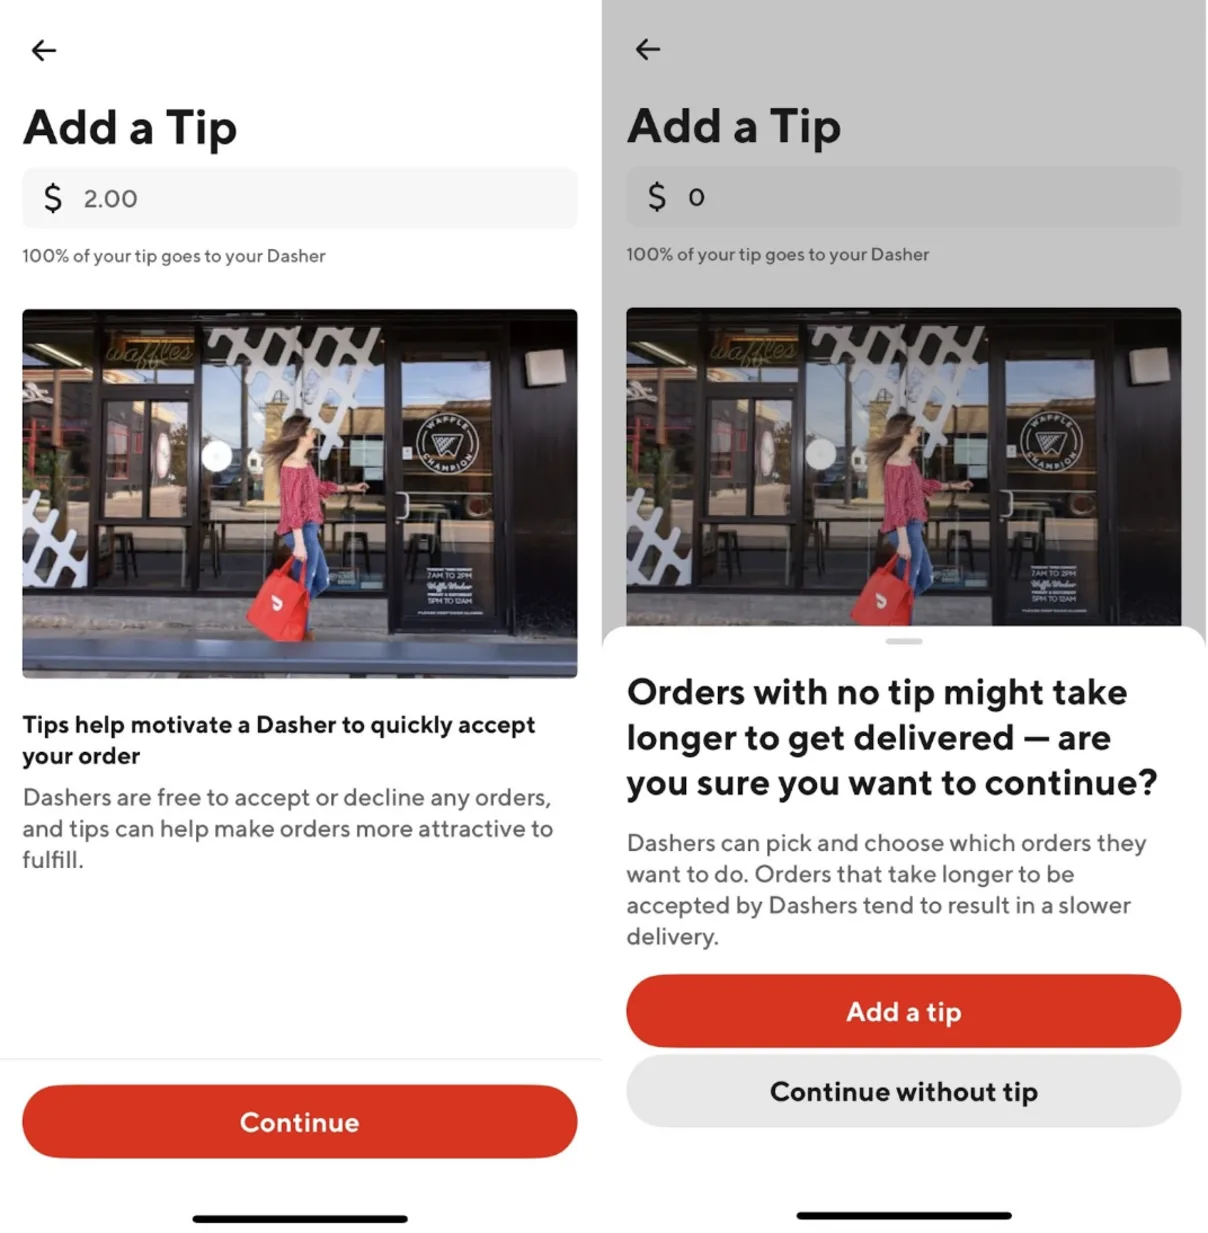 DoorDash will issue warnings to customers who do not tip